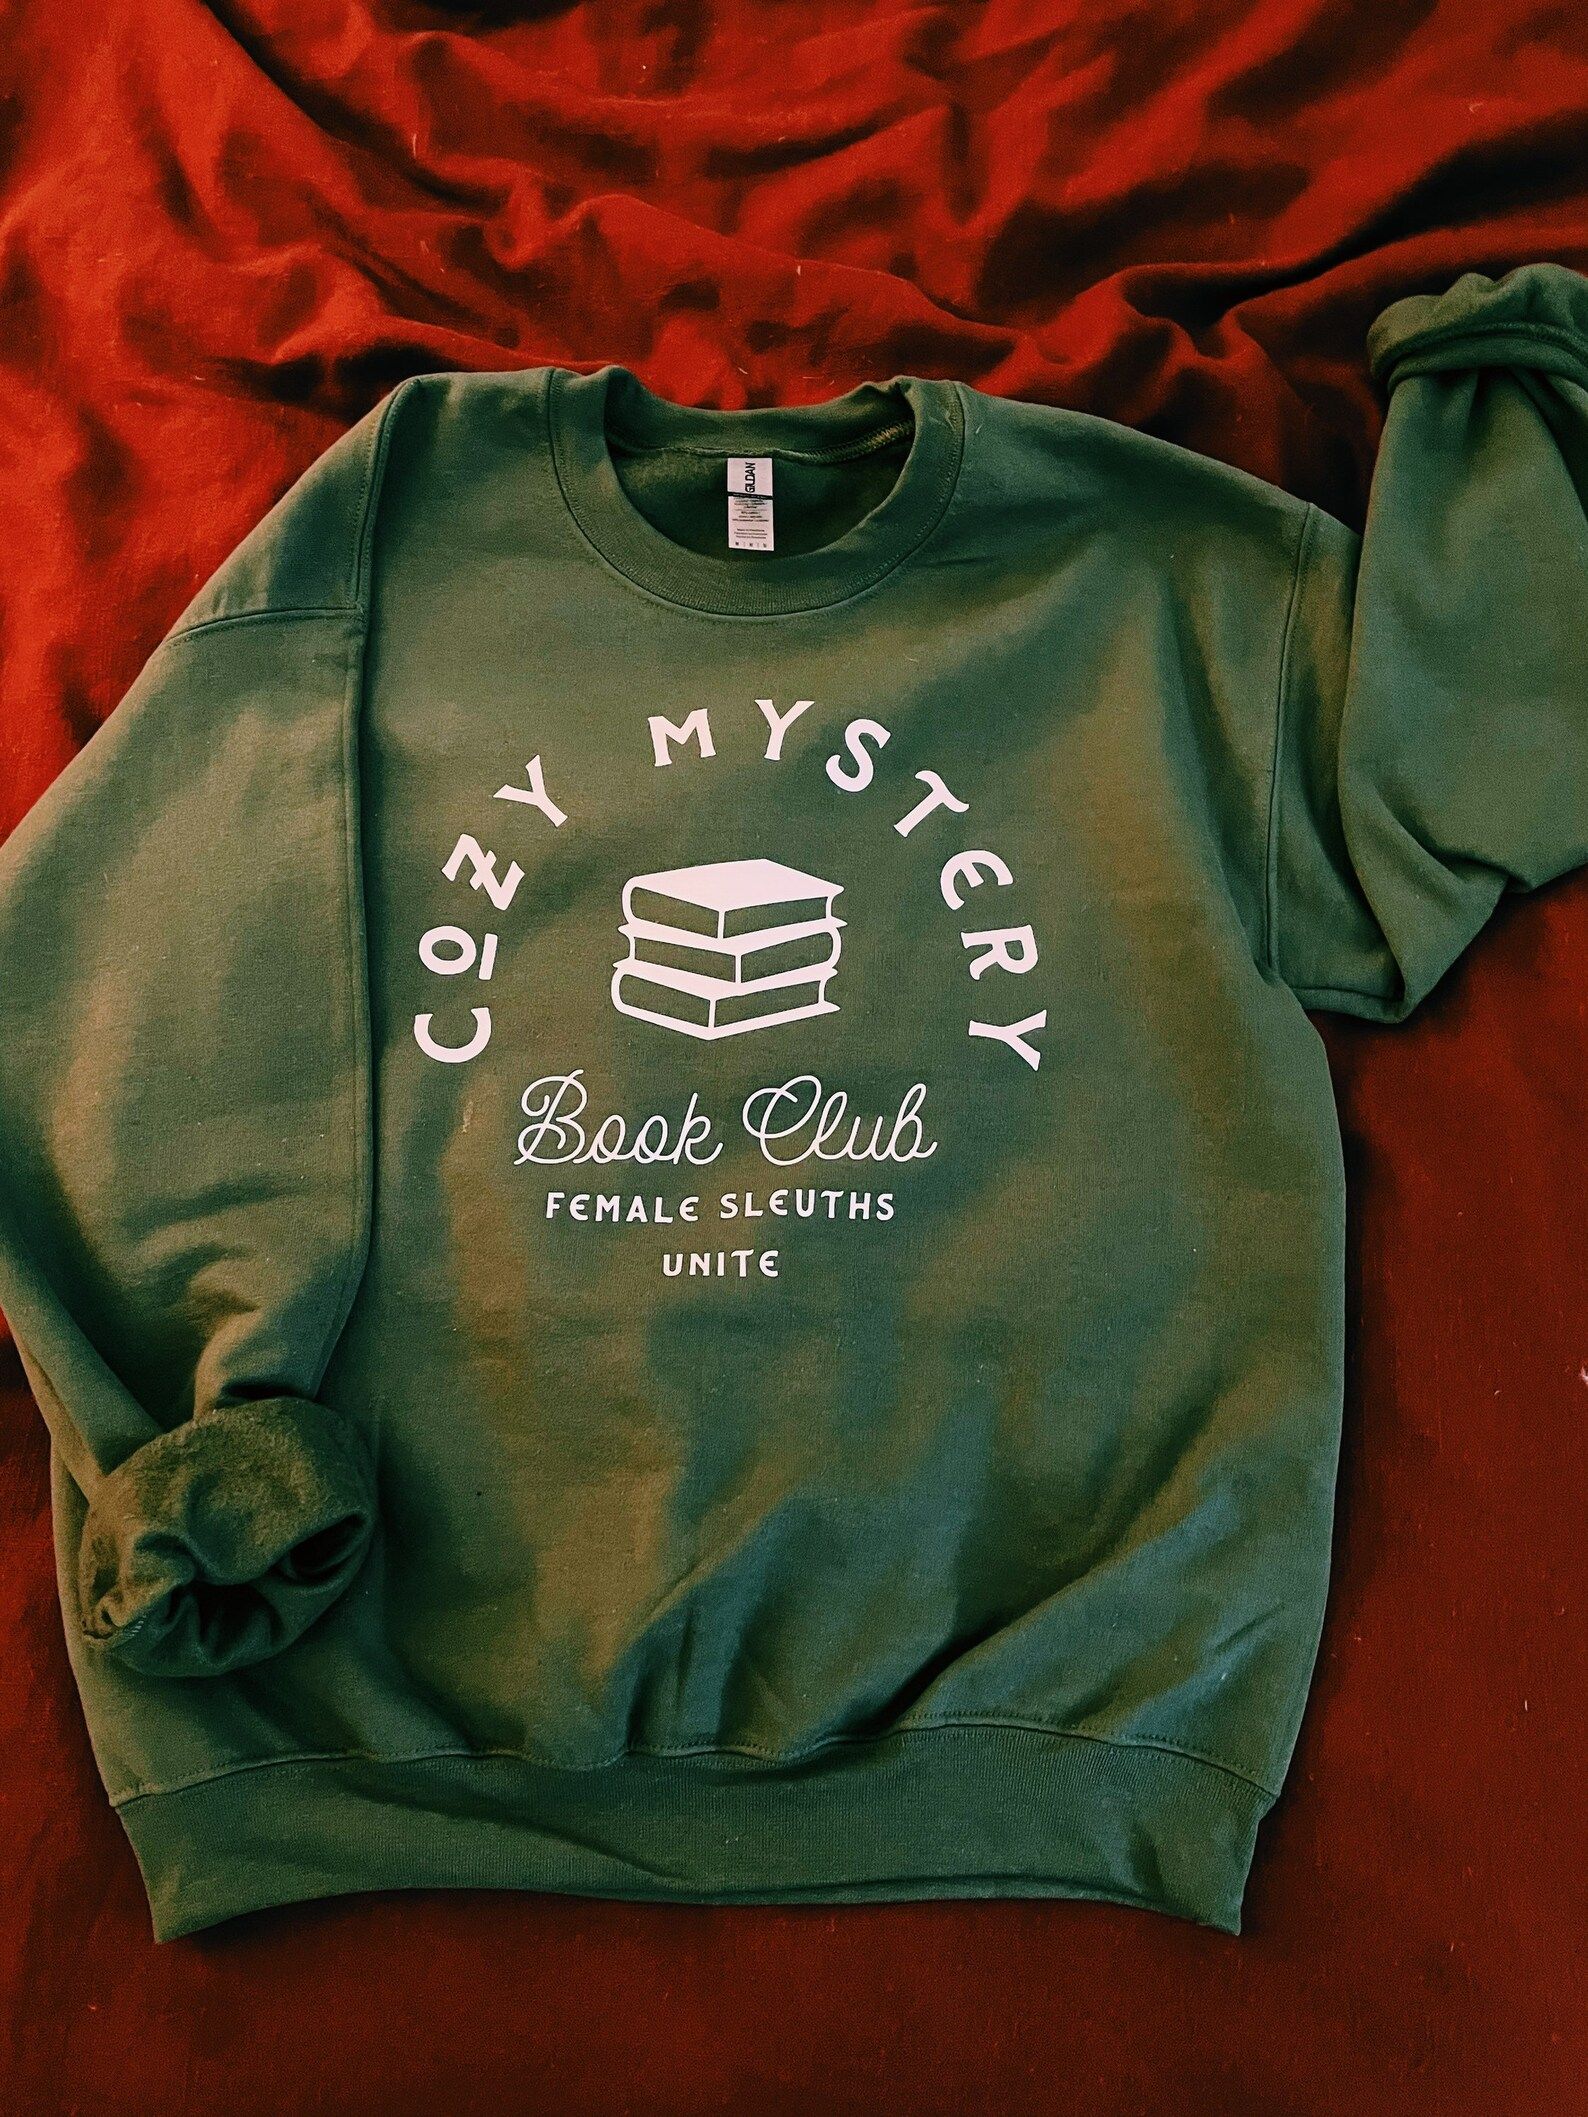 Green sweatshirt that reads :cozy mystery book club" with a stack of books and the tagline "female sleuths unite"